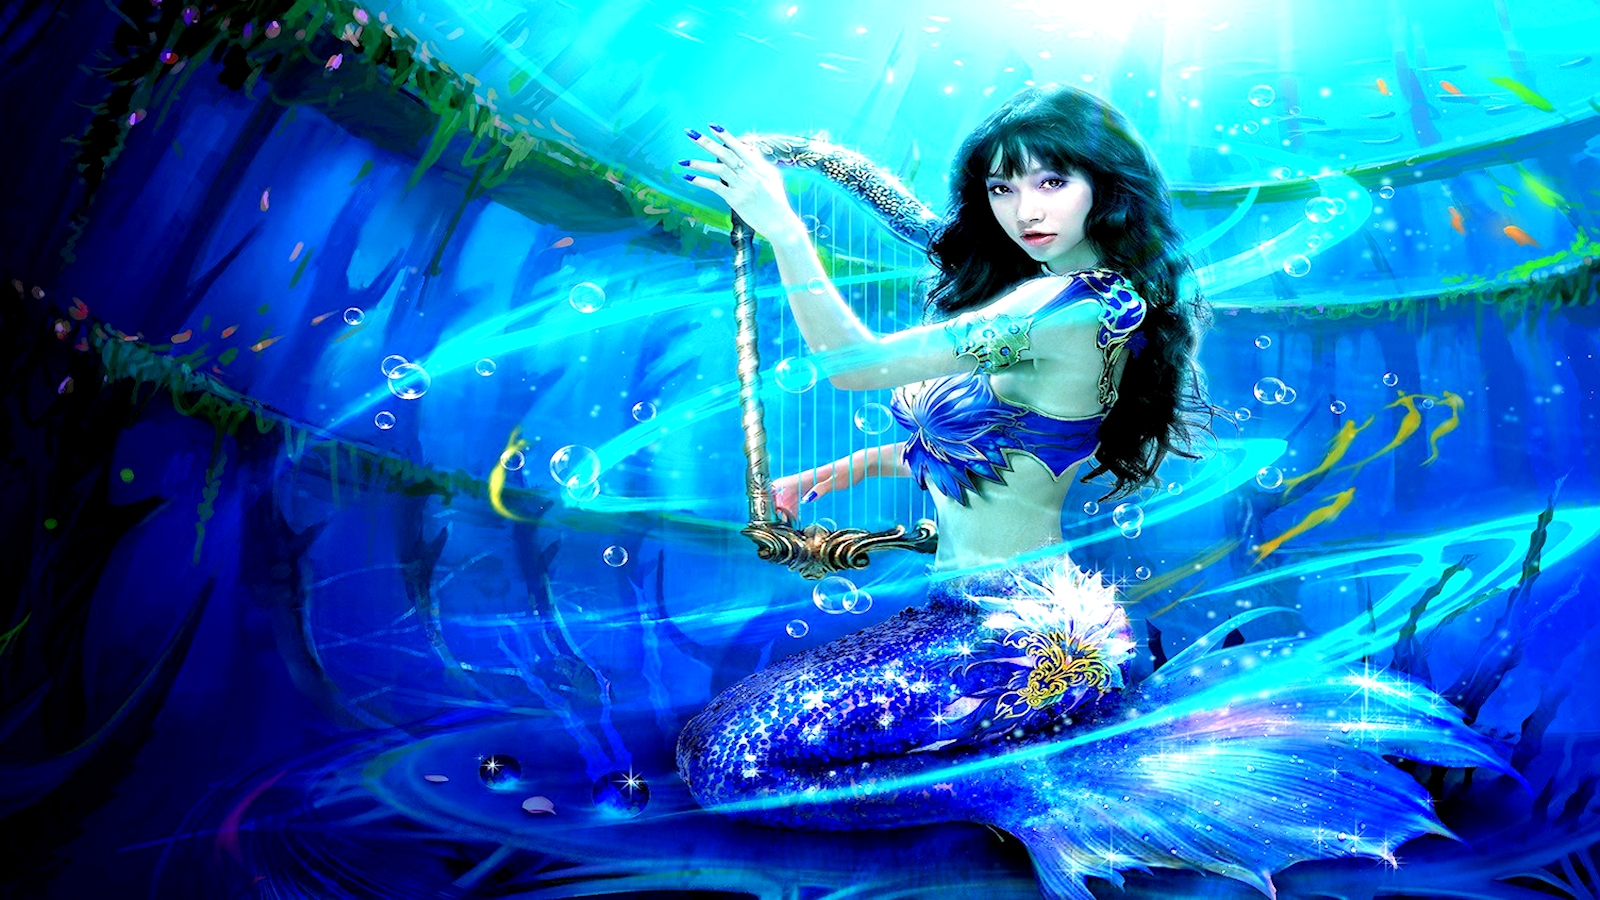 Mermaids Images Blue Mermaid Hd Wallpaper And Background HD Wallpapers Download Free Images Wallpaper [wallpaper981.blogspot.com]